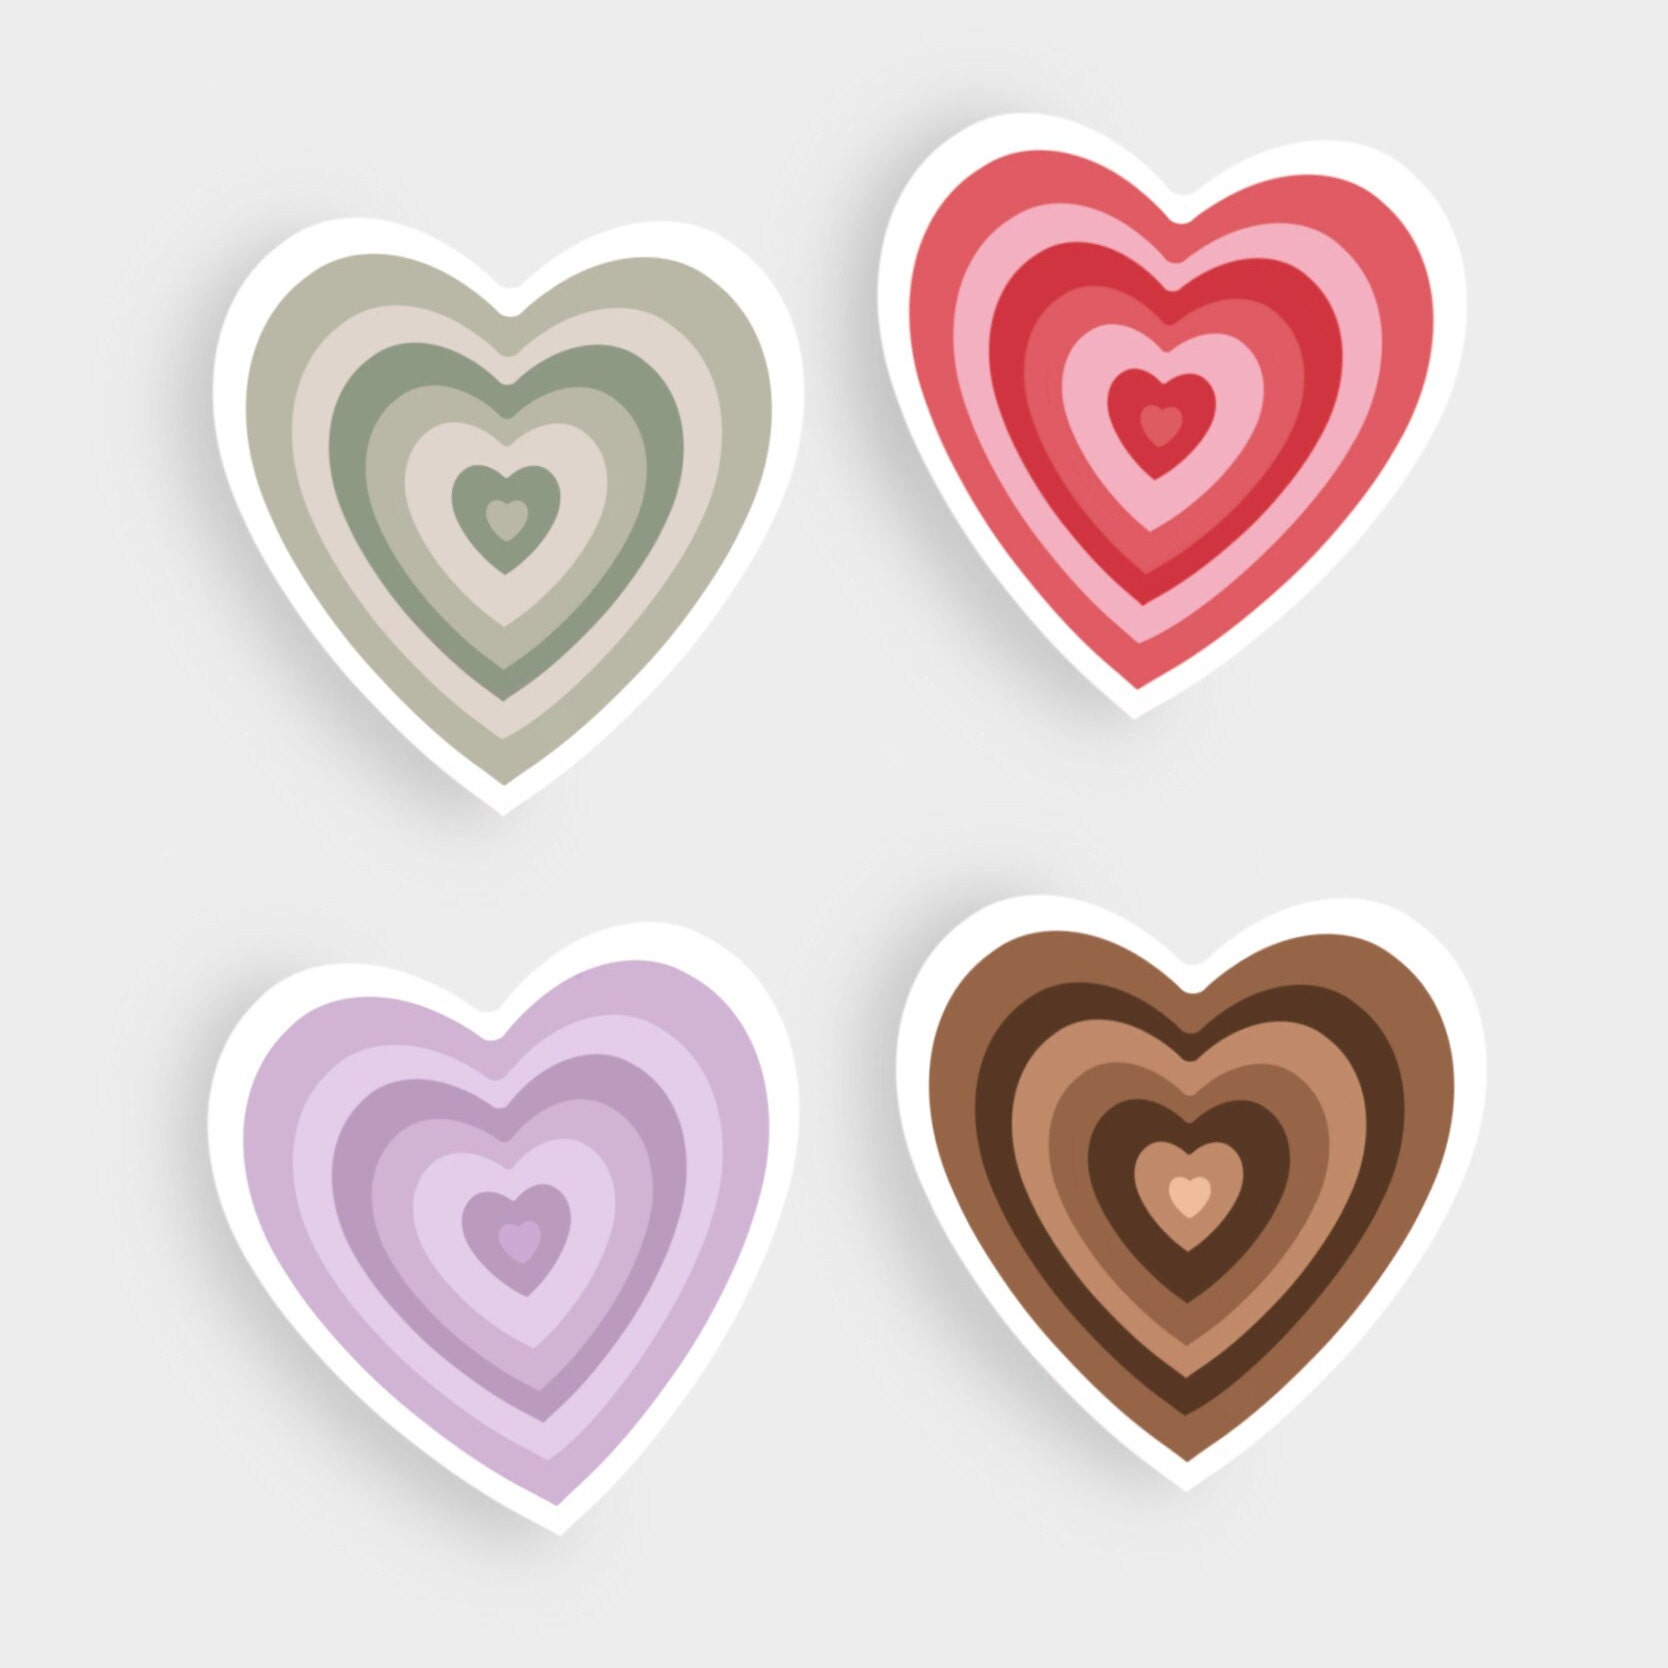 Multi Colored Hand-drawn Heart Stickers Red, Brown, Sage Green